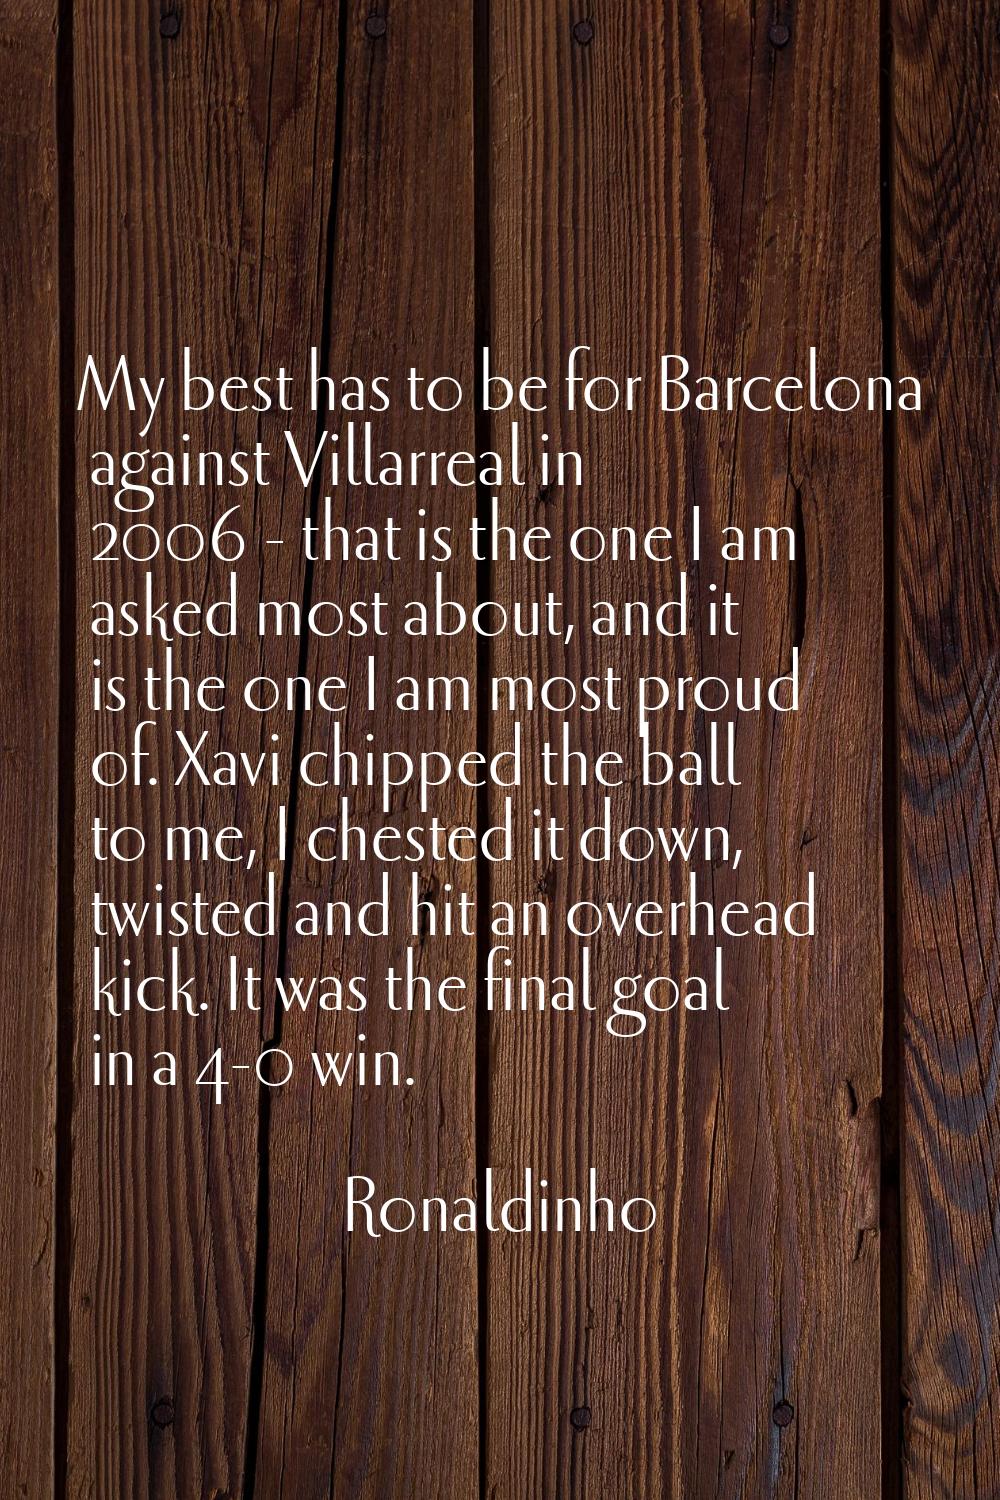 My best has to be for Barcelona against Villarreal in 2006 - that is the one I am asked most about,